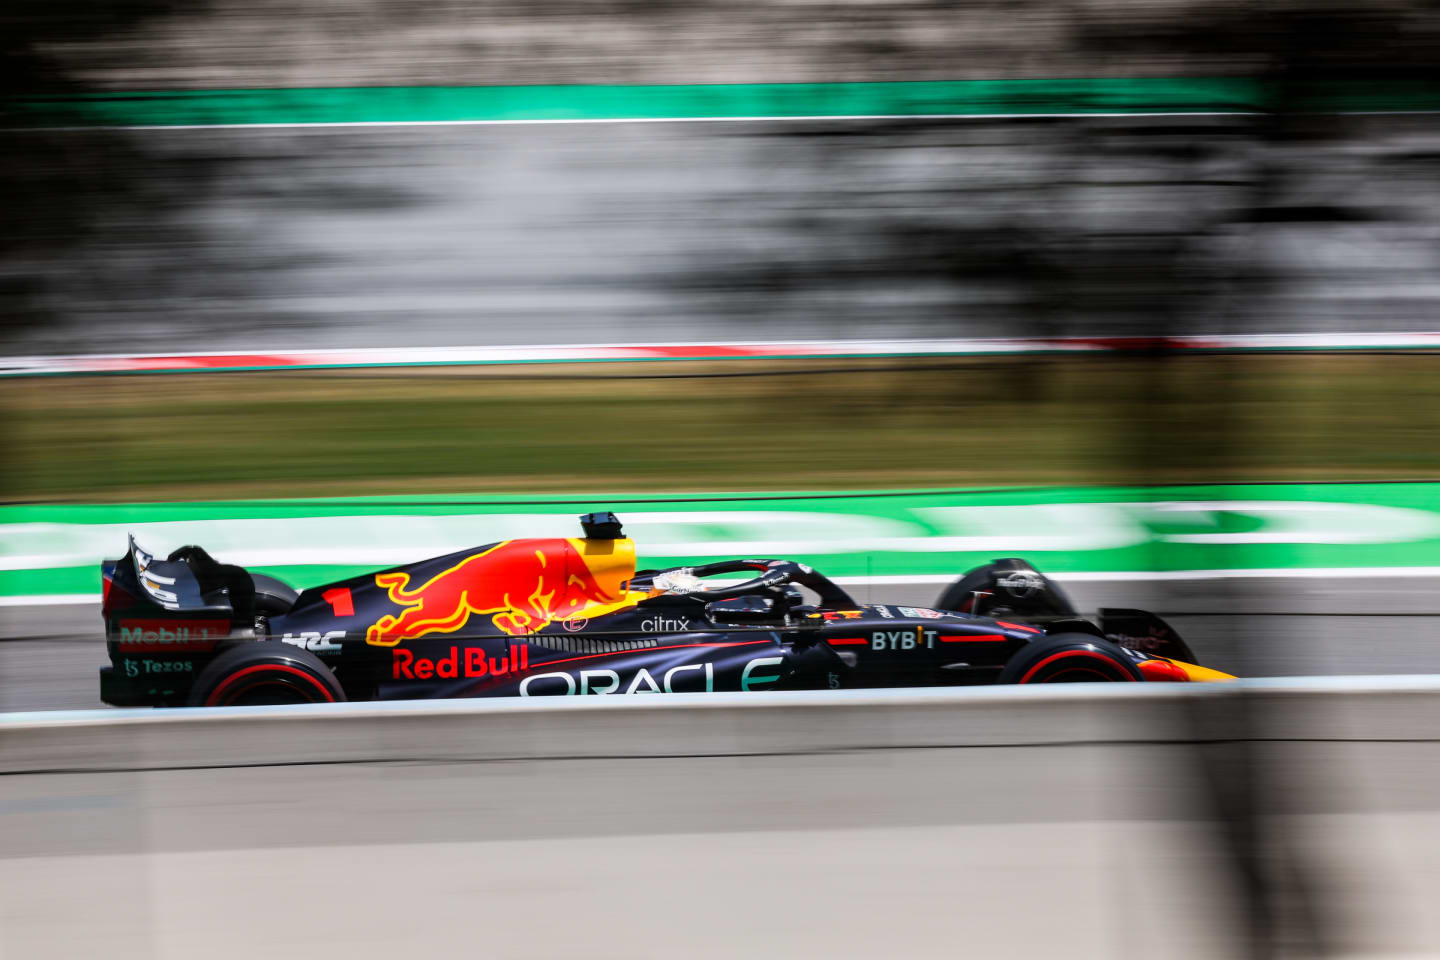 BARCELONA, SPAIN - MAY 21: Max Verstappen of Red Bull Racing and The Netherlands during qualifying ahead of the F1 Grand Prix of Spain at Circuit de Barcelona-Catalunya on May 21, 2022 in Barcelona, Spain. (Photo by Peter Fox/Getty Images)